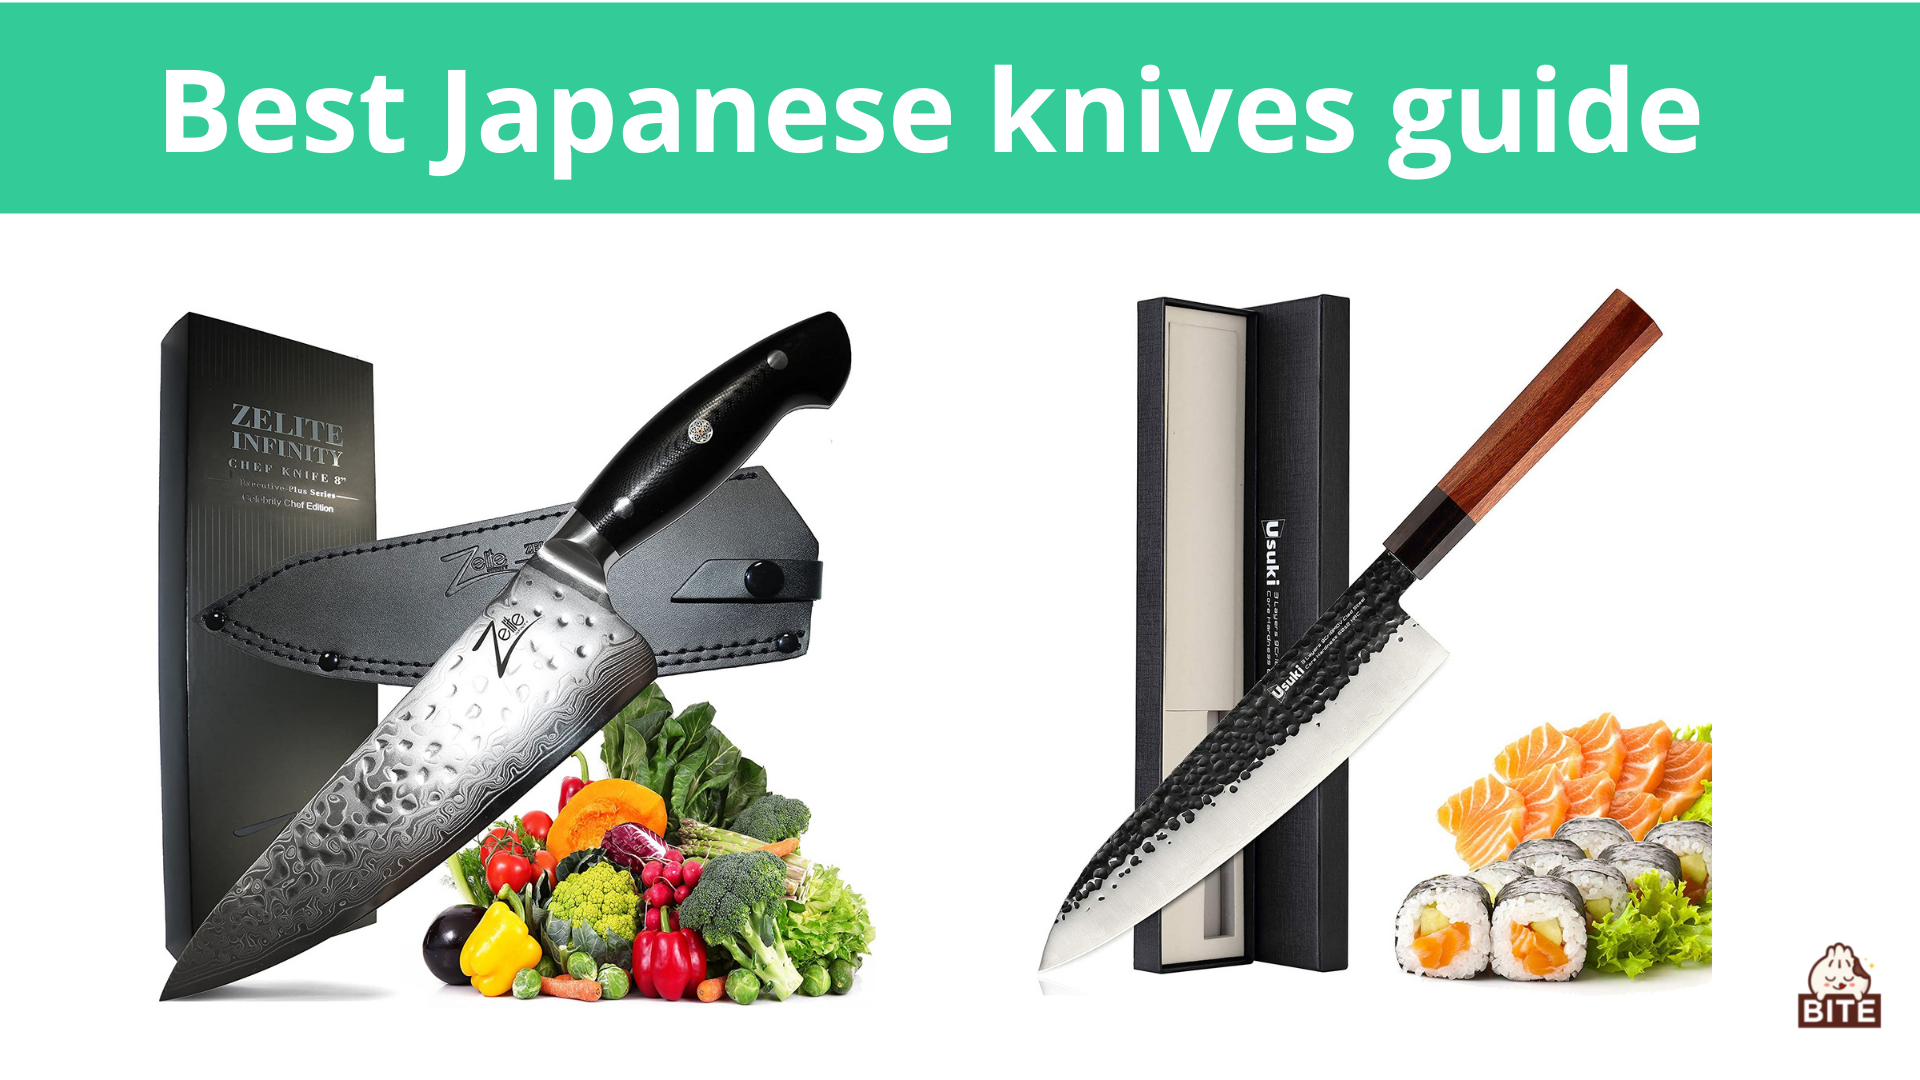 Best Japanese knives guide | These are the different must-have knives in Japanese cooking